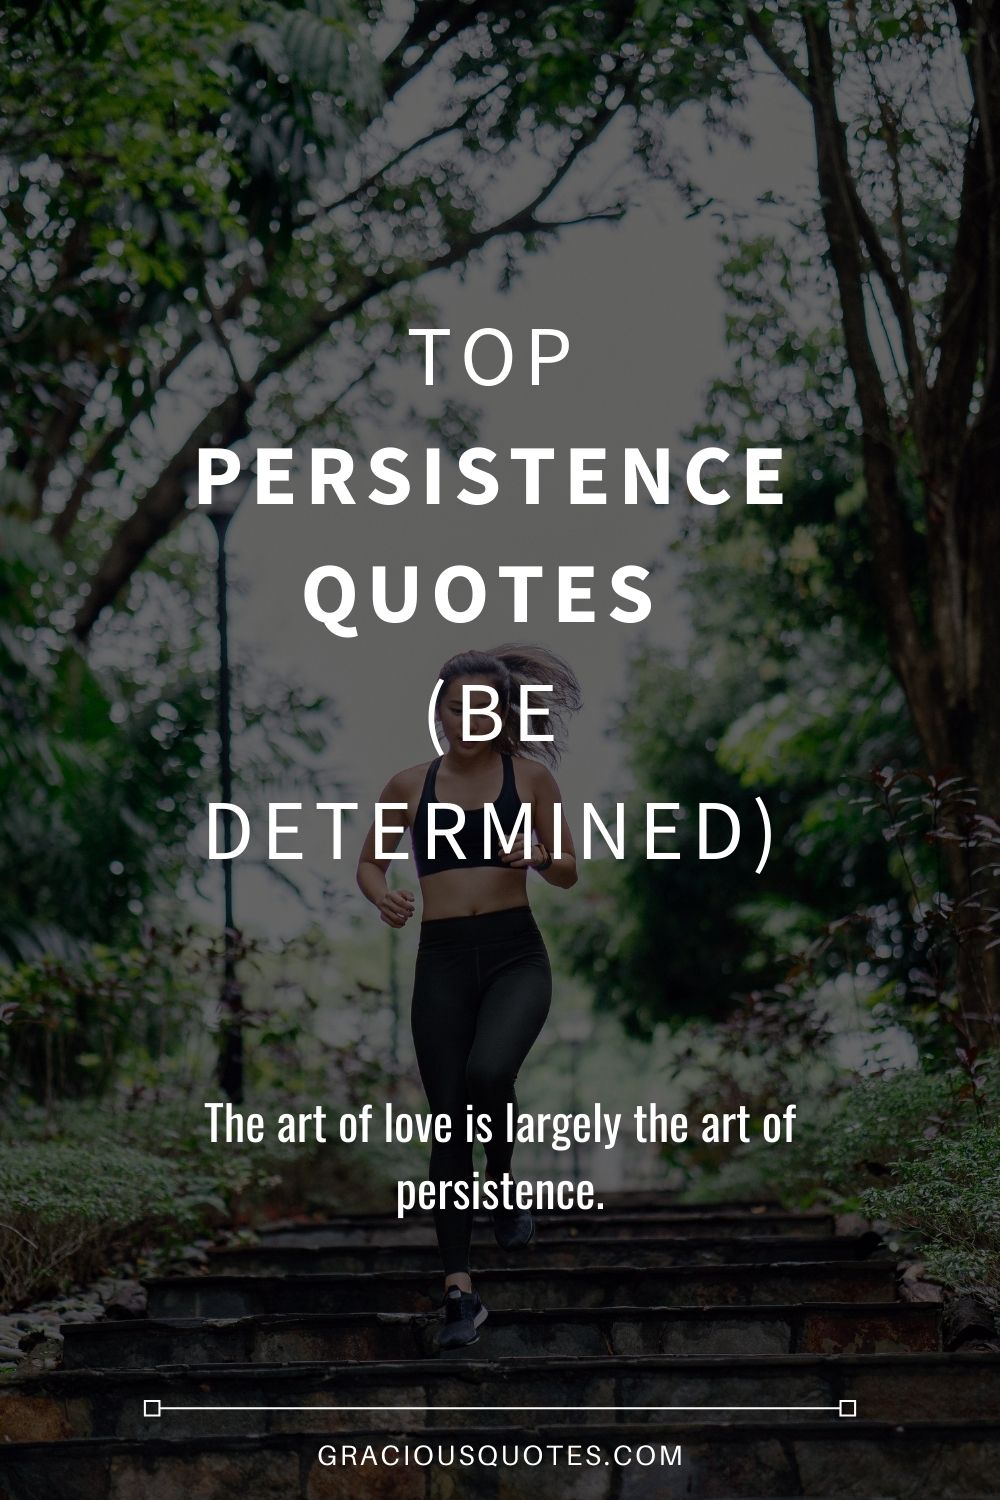 Top Persistence Quotes (BE DETERMINED) - Gracious Quotes